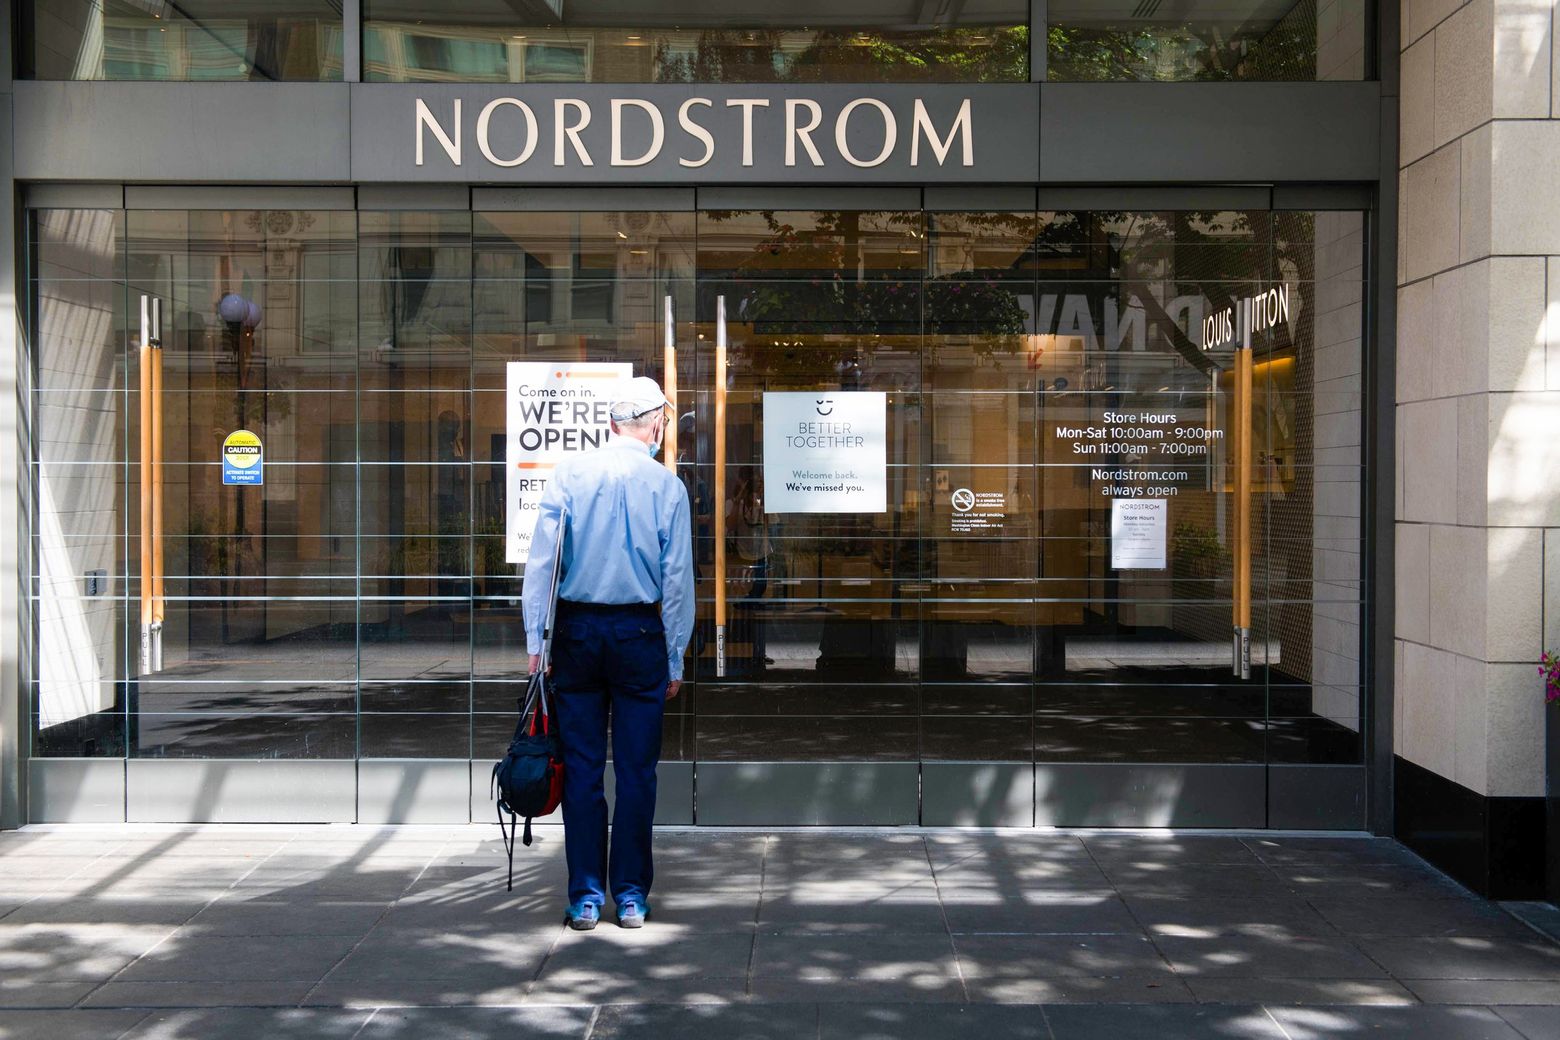 lige ud Ansvarlige person Gymnast Nordstrom shares plunge as labor costs, inventory issues hit sales | The  Seattle Times